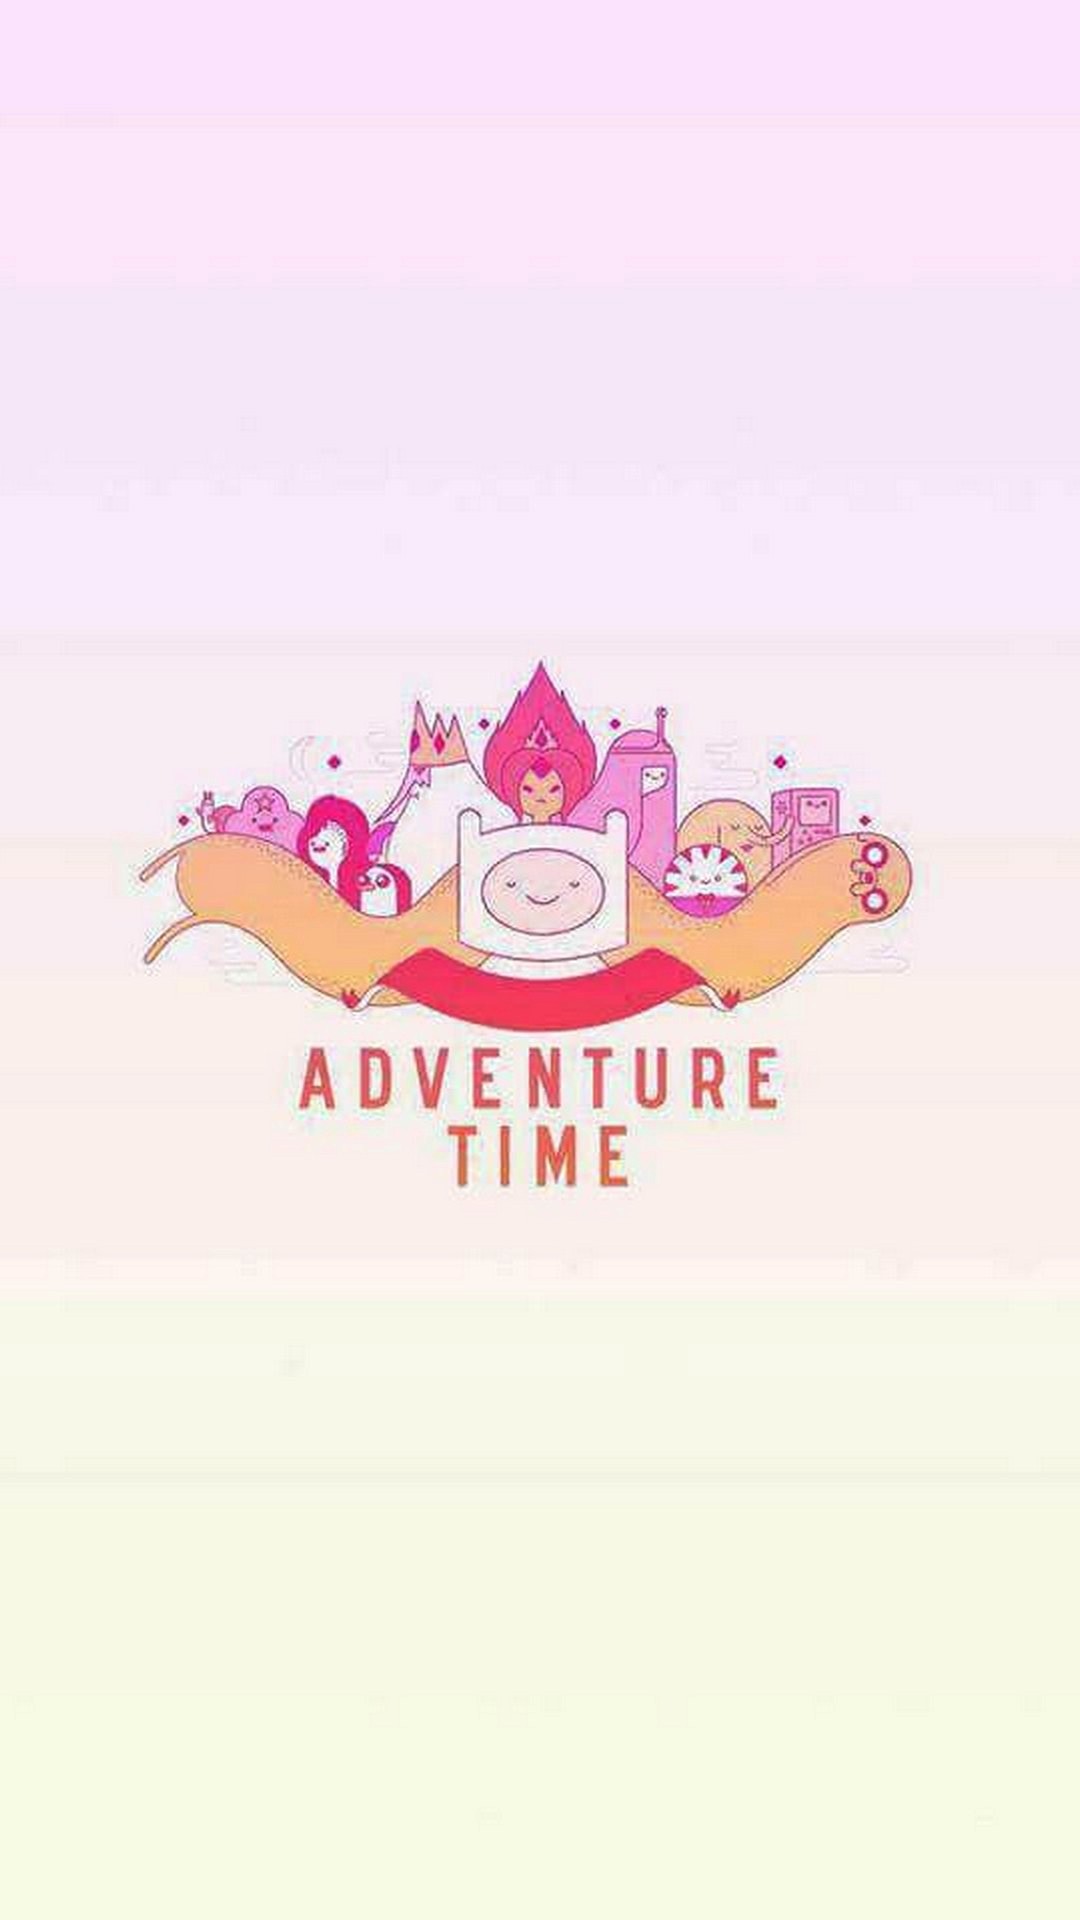 iPhone Wallpaper Adventure Time with high-resolution 1080x1920 pixel. You can use this wallpaper for your iPhone 5, 6, 7, 8, X backgrounds, Mobile Screensaver, or iPad Lock Screen